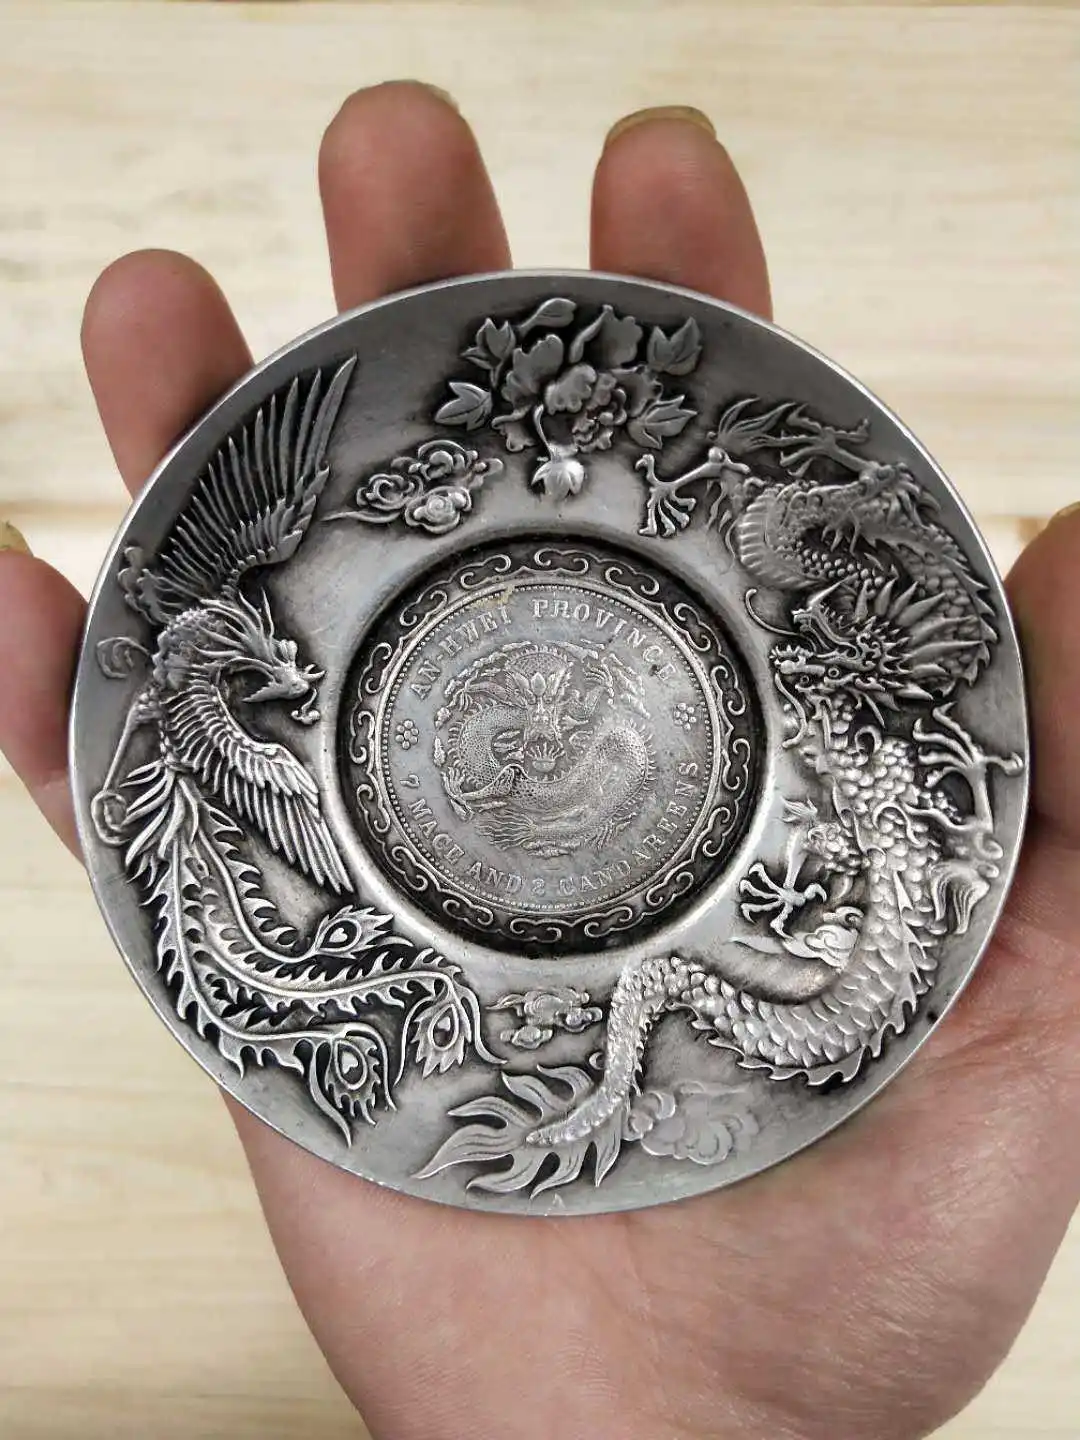 

exquisite craftsmanship dragon and phoenix inlaid silver yuan plate, wrapped in slurry, moistens and beautifies home furnishings